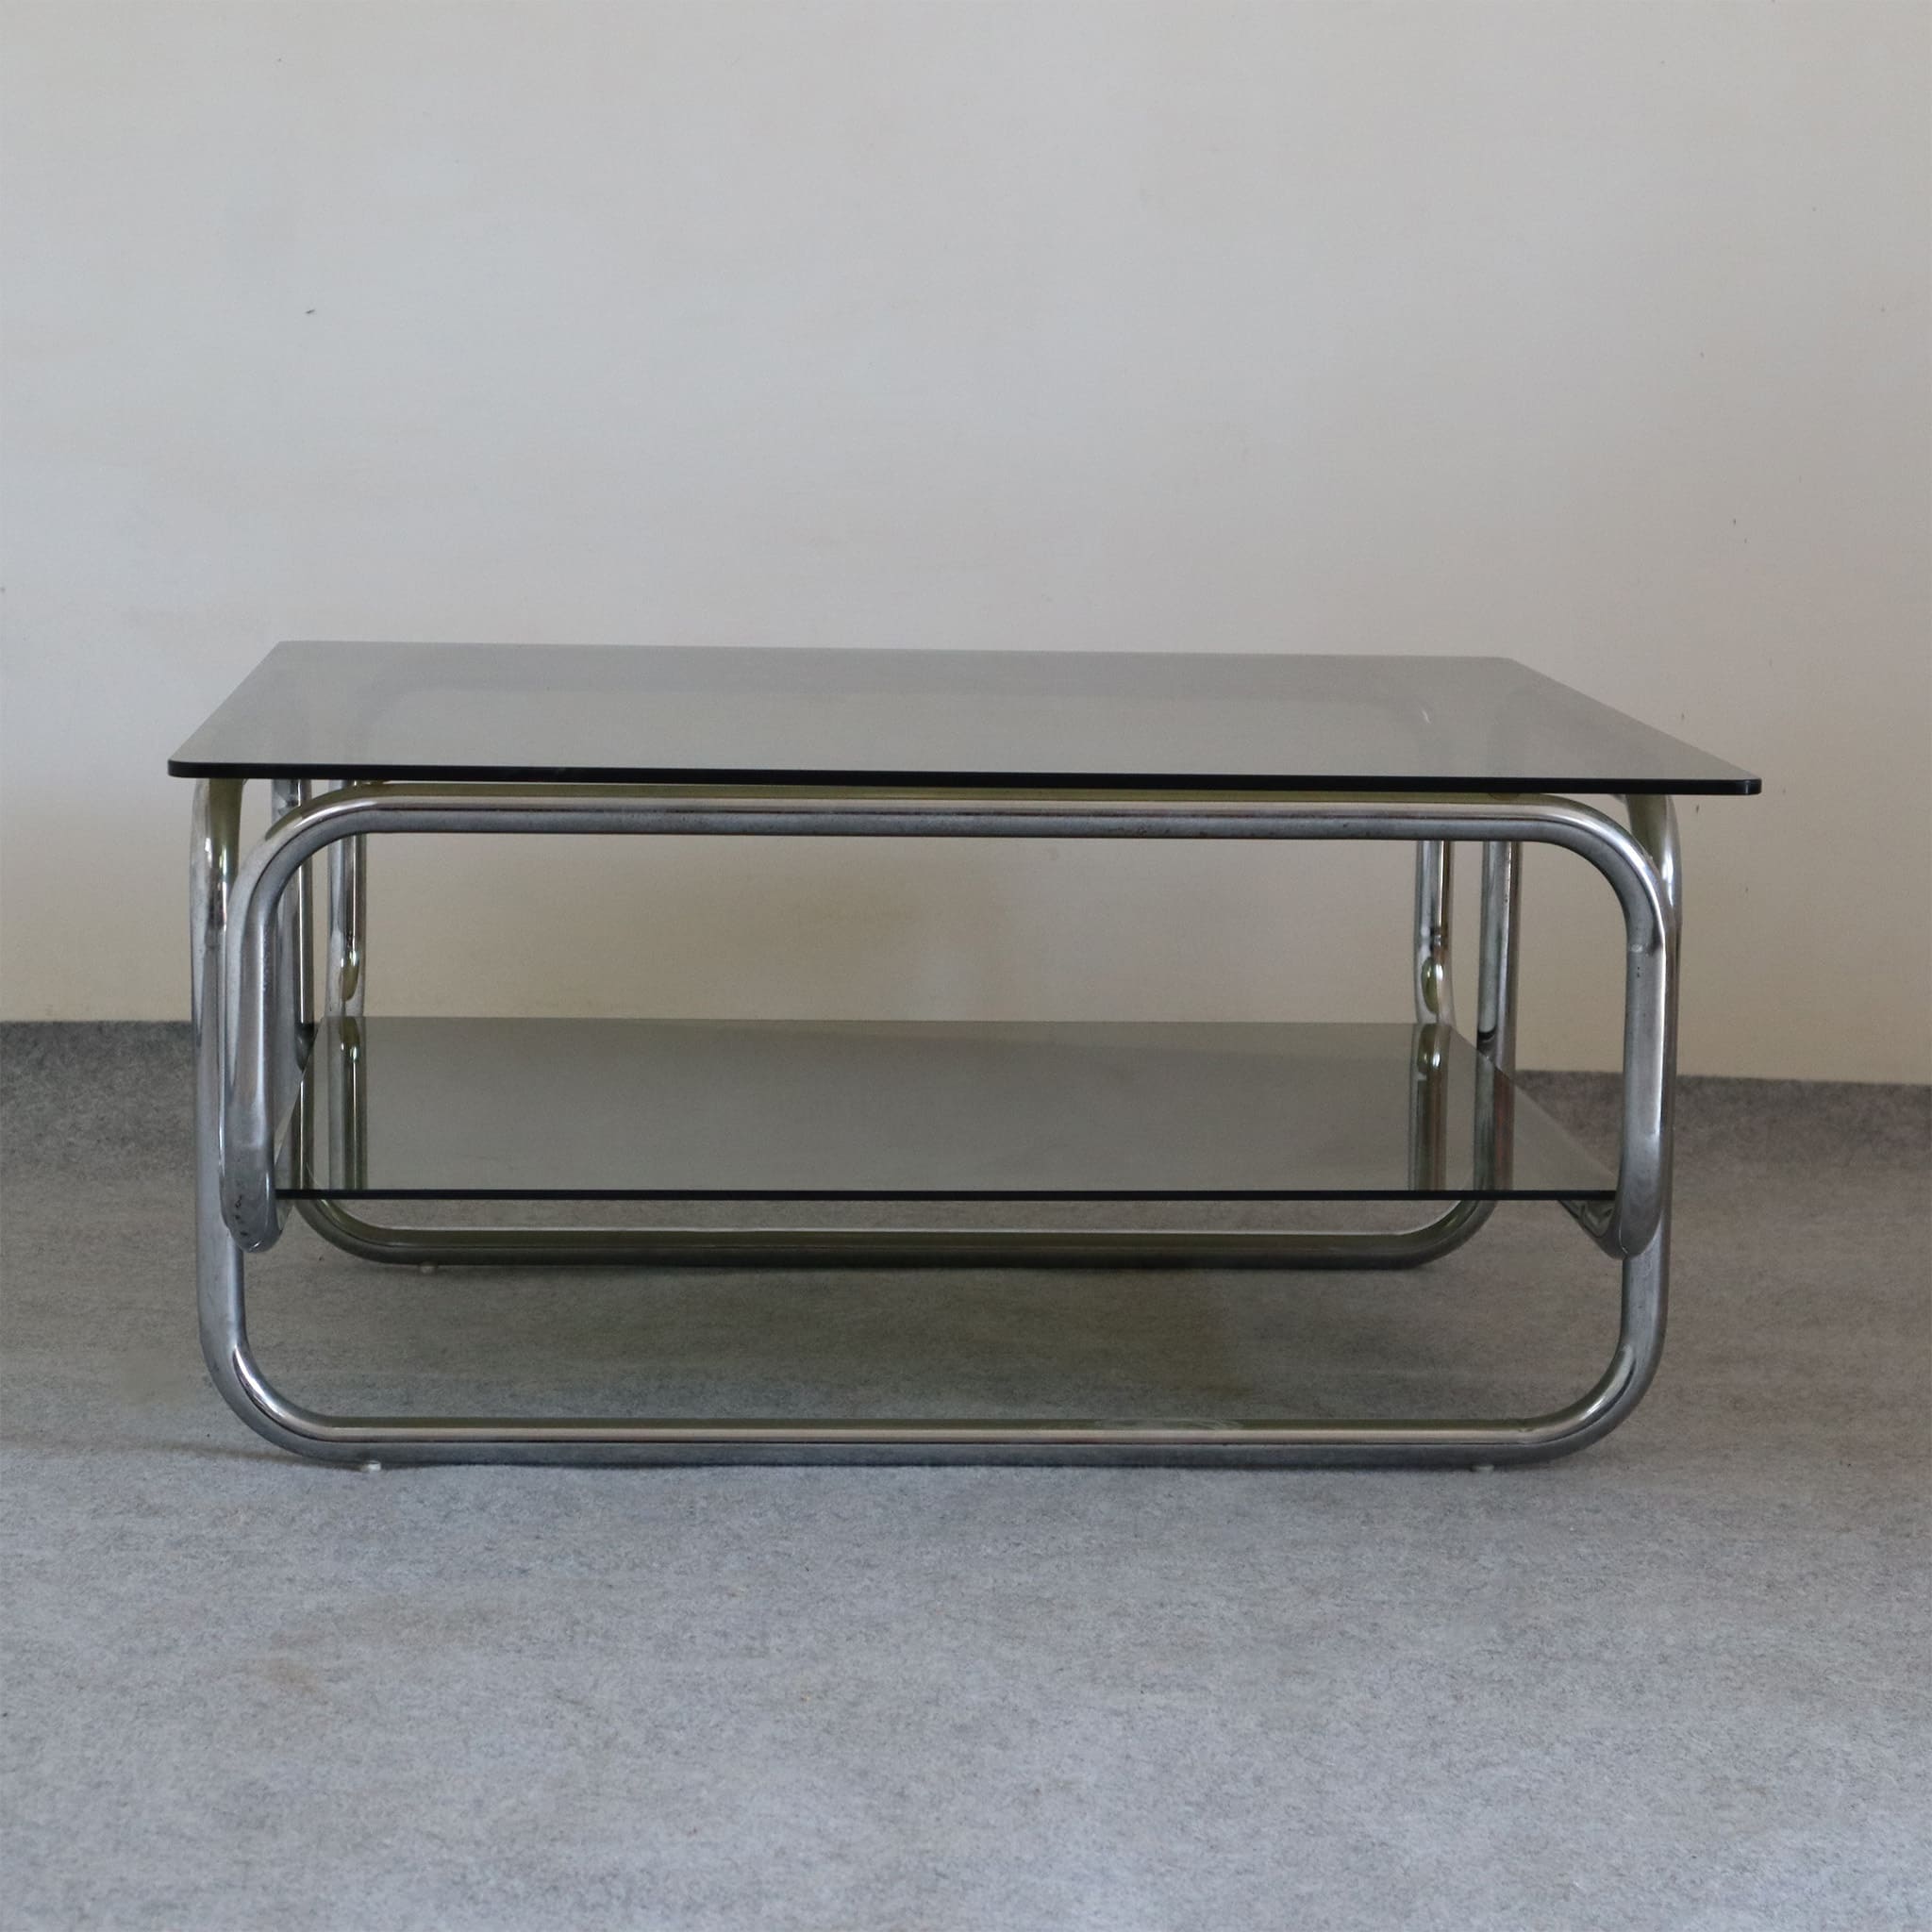 visionidepoca-modern-art-coffee-table-from-the-70s-tubular-chromed-and-double-smoked-glass-made-in-italy